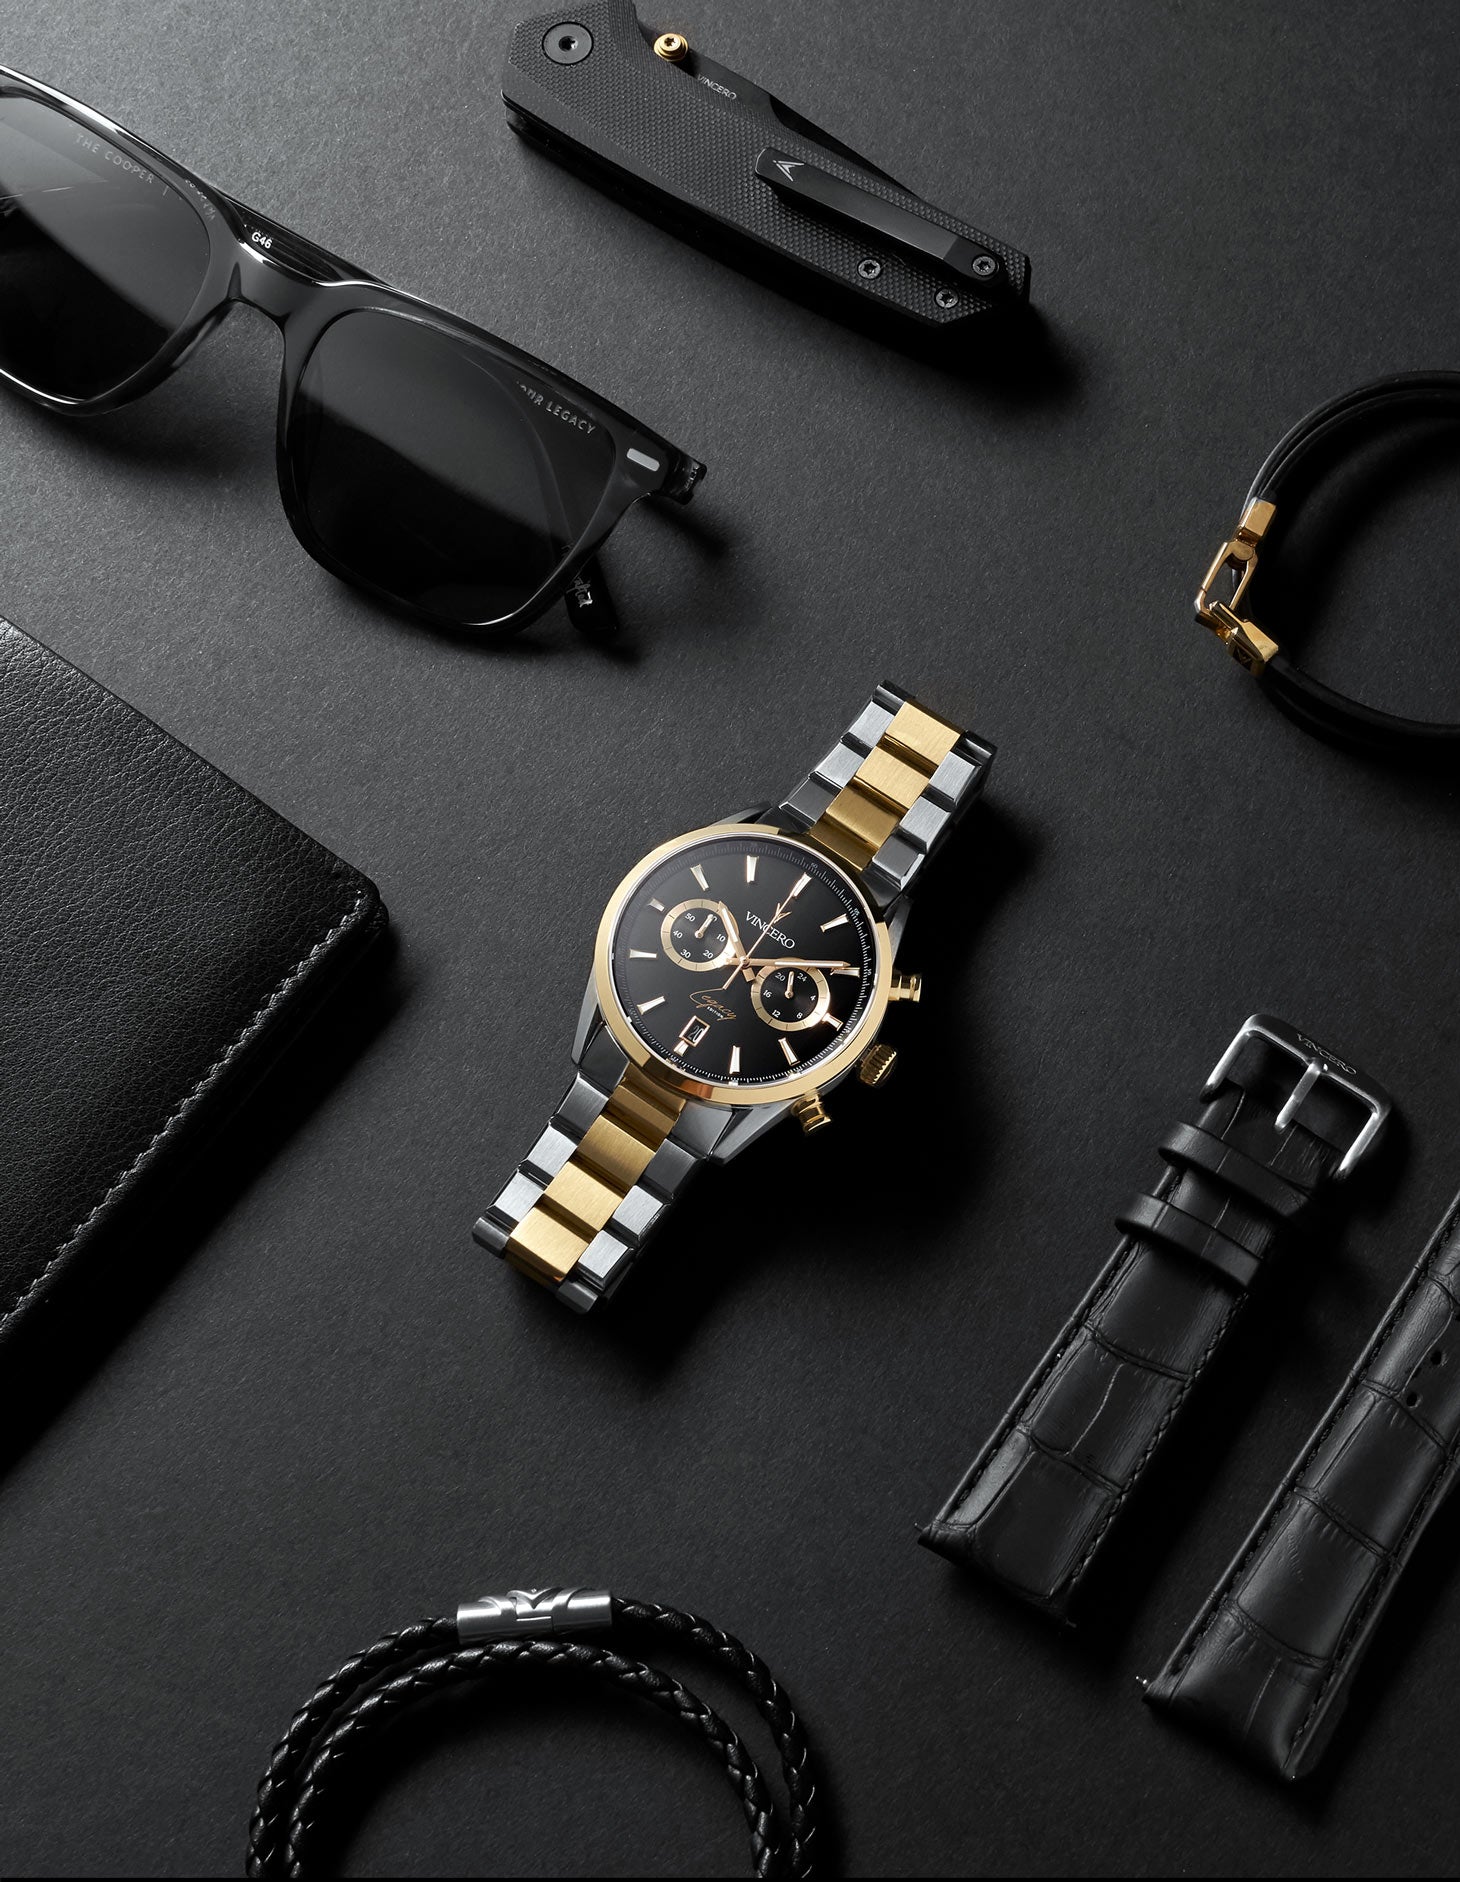 Men's Black and Gold Watch, Vincero Watches